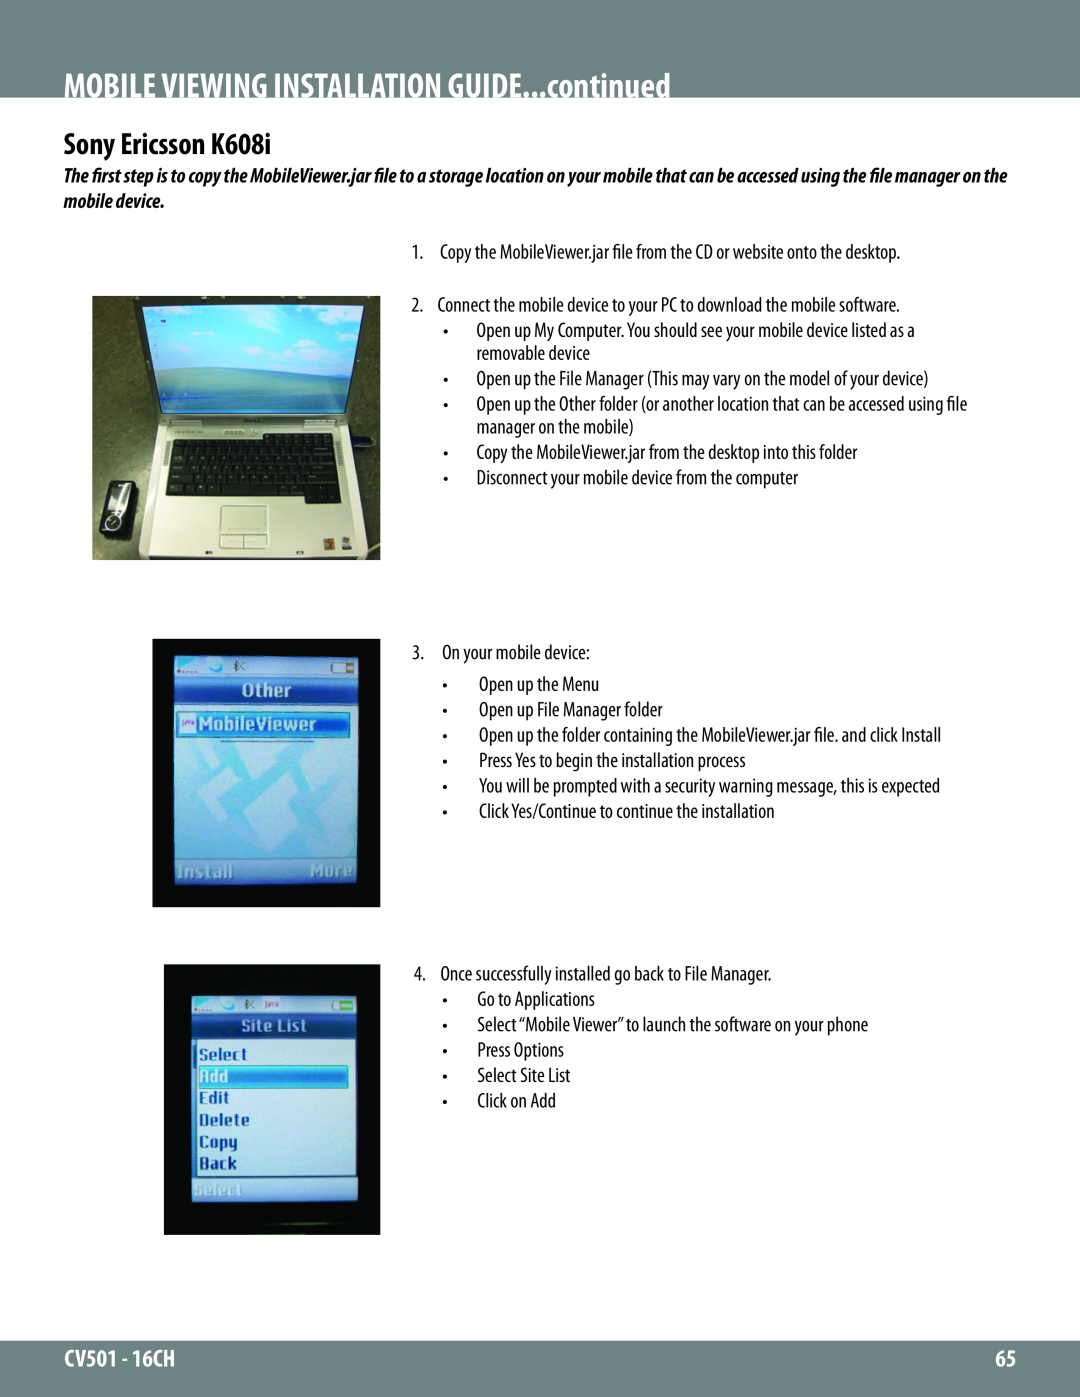 SVAT Electronics CV501 - 16CH instruction manual MOBILE VIEWING INSTALLATION GUIDE...continued, Sony Ericsson K608i 